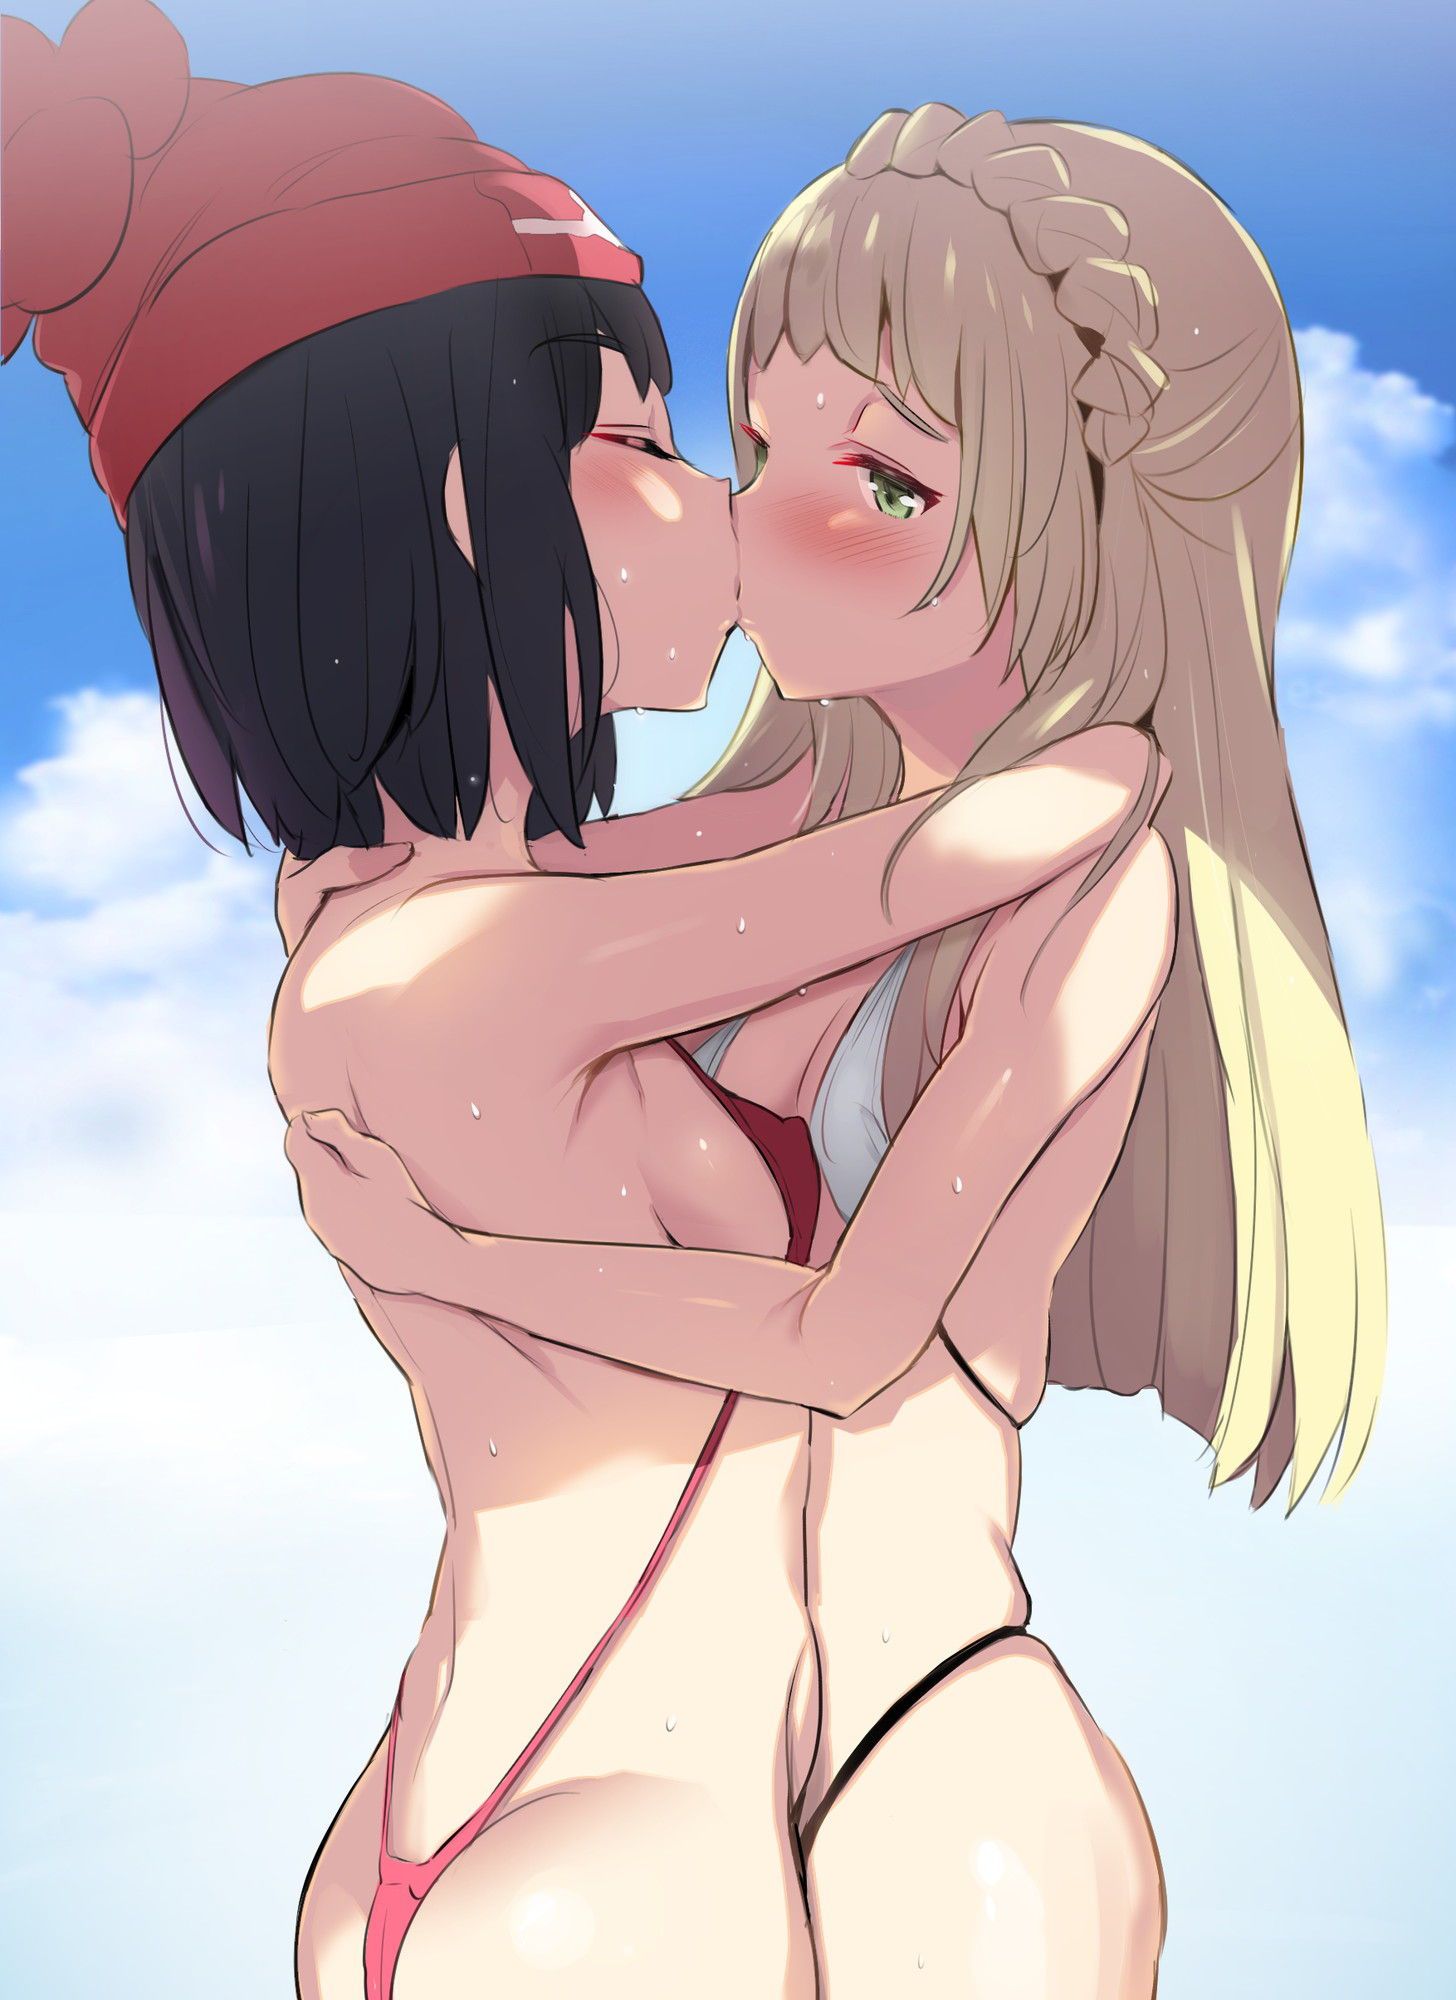 I collected erotic images of Yuri. 11